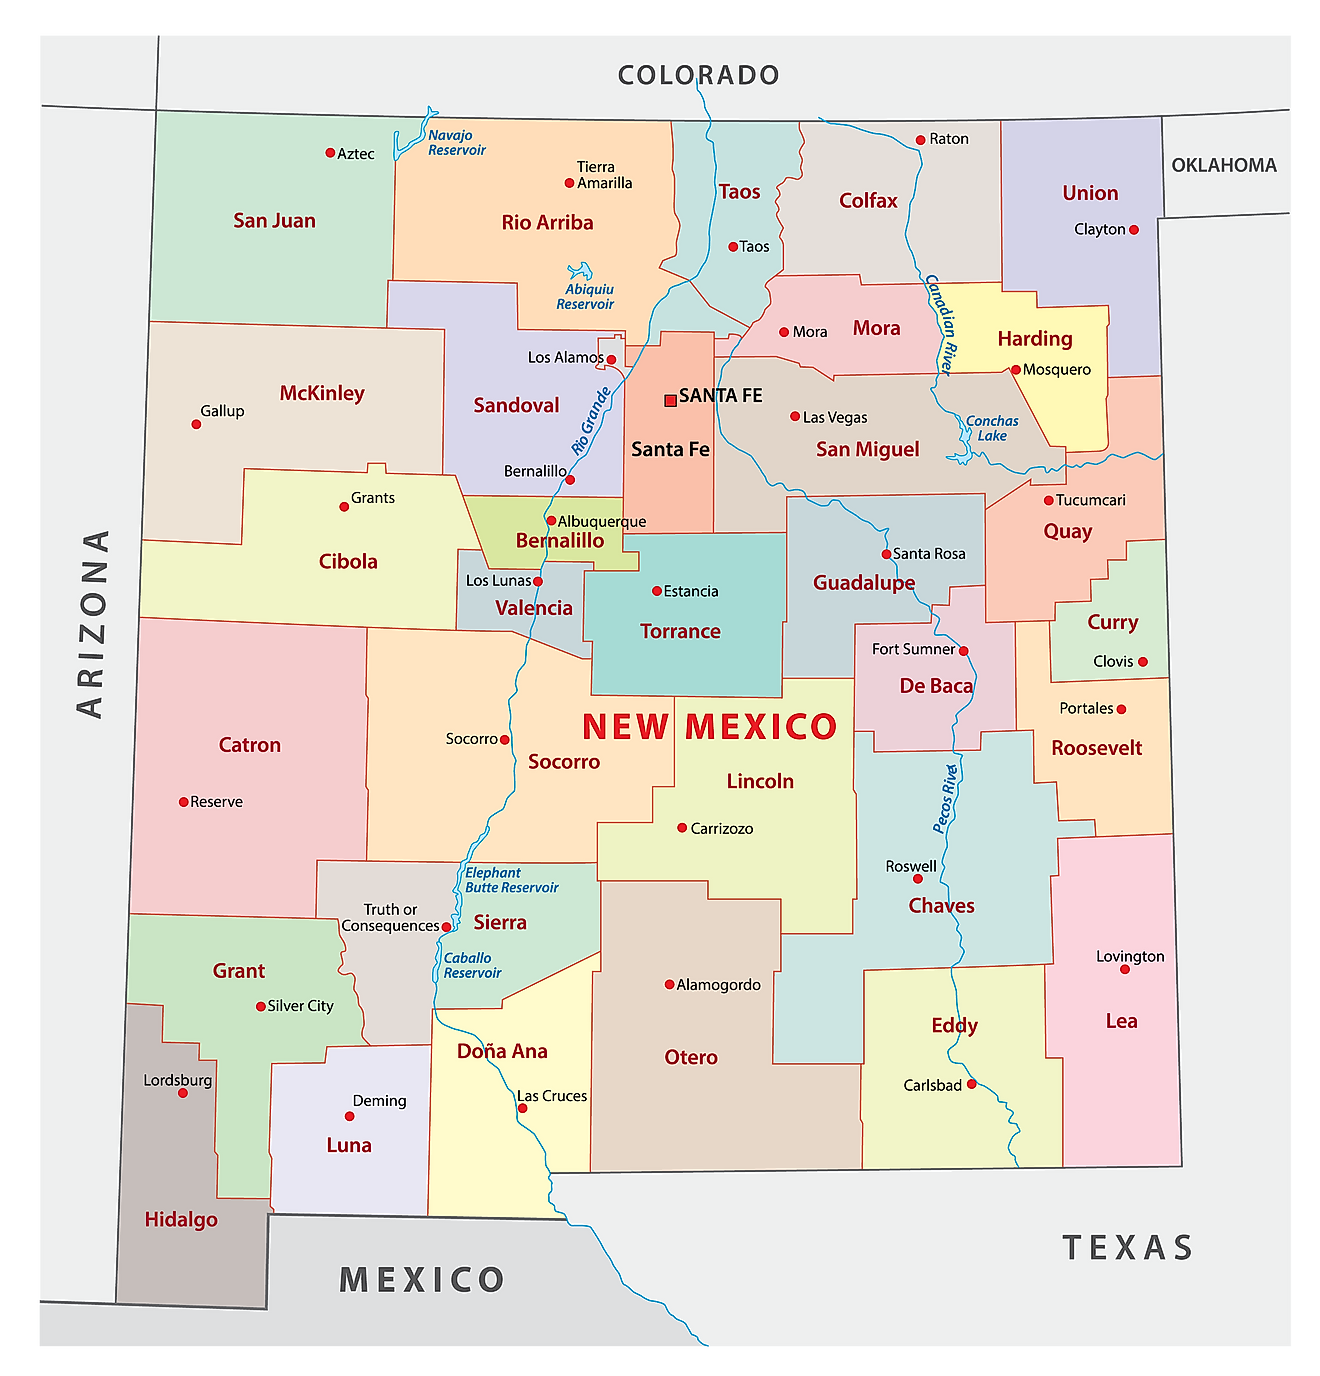 Alphabetical list of New Mexico Counties